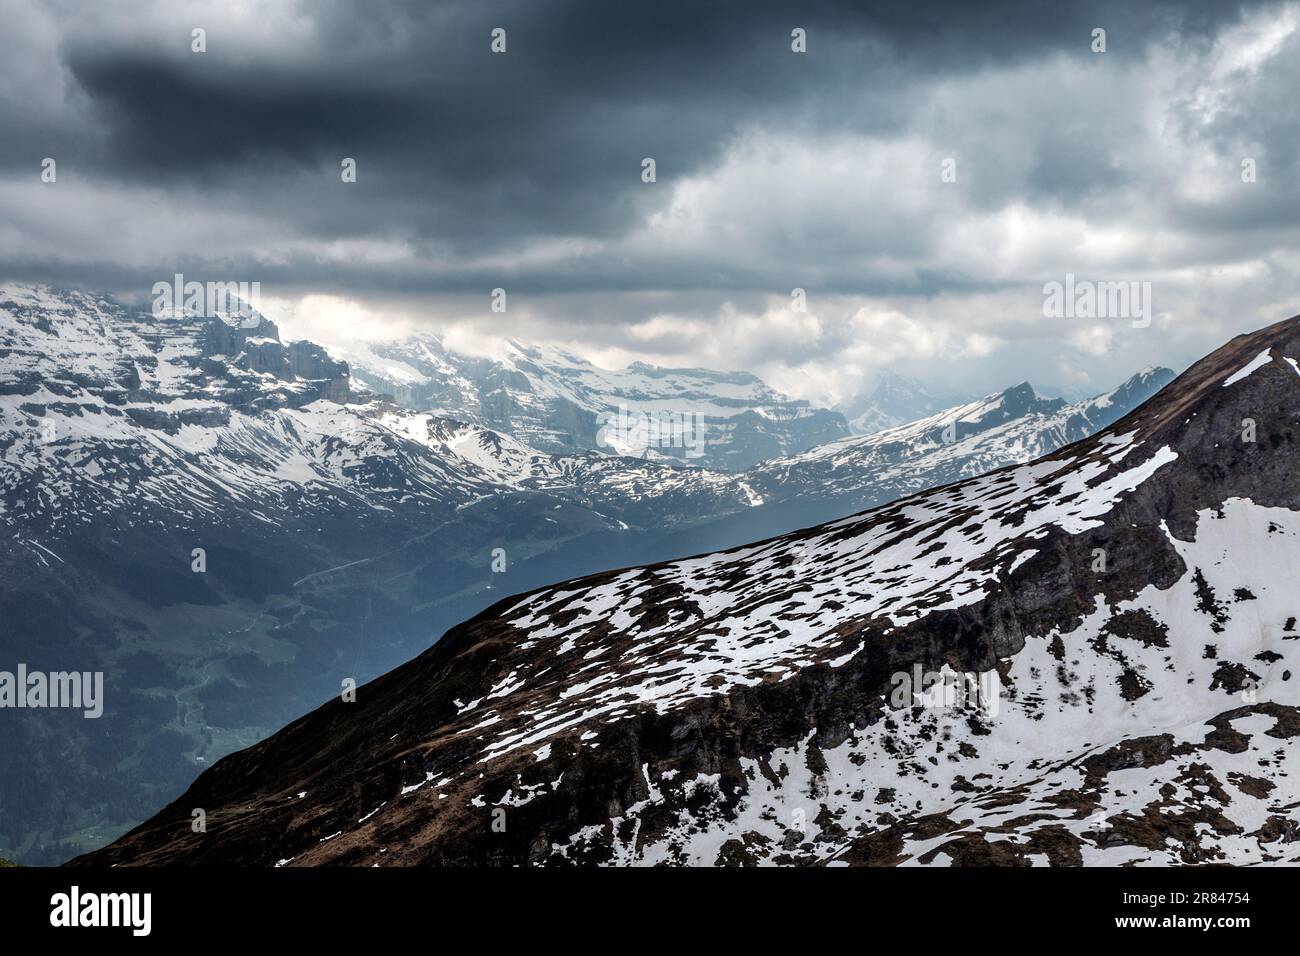 Scenic mountain view seen from the Eiger Ultra Trail around First mountain, Switzerland Stock Photo